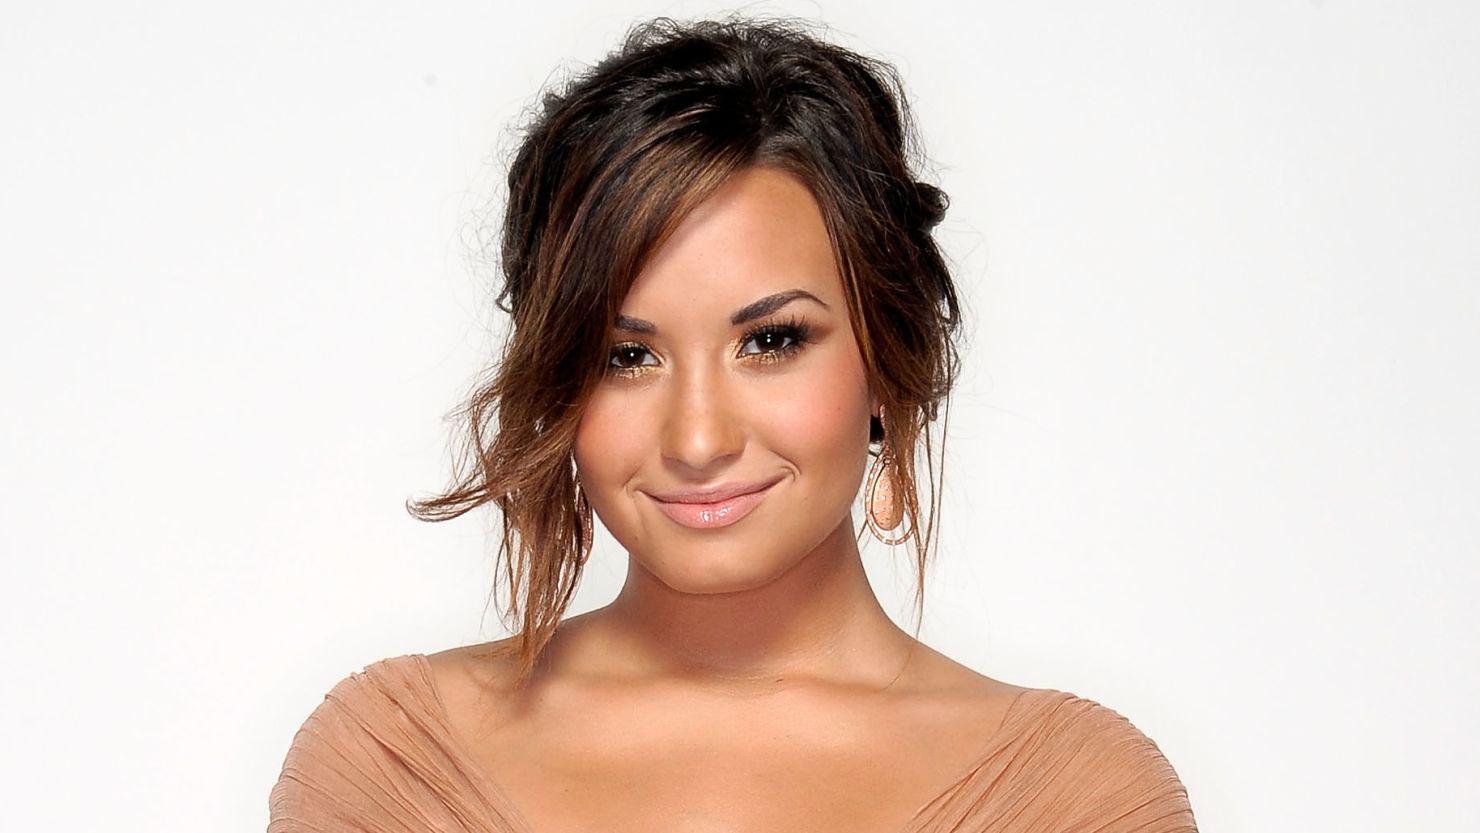 Demi Lovato addresses her issue with cutting on a ballad featured on her new album, "Unbroken" 